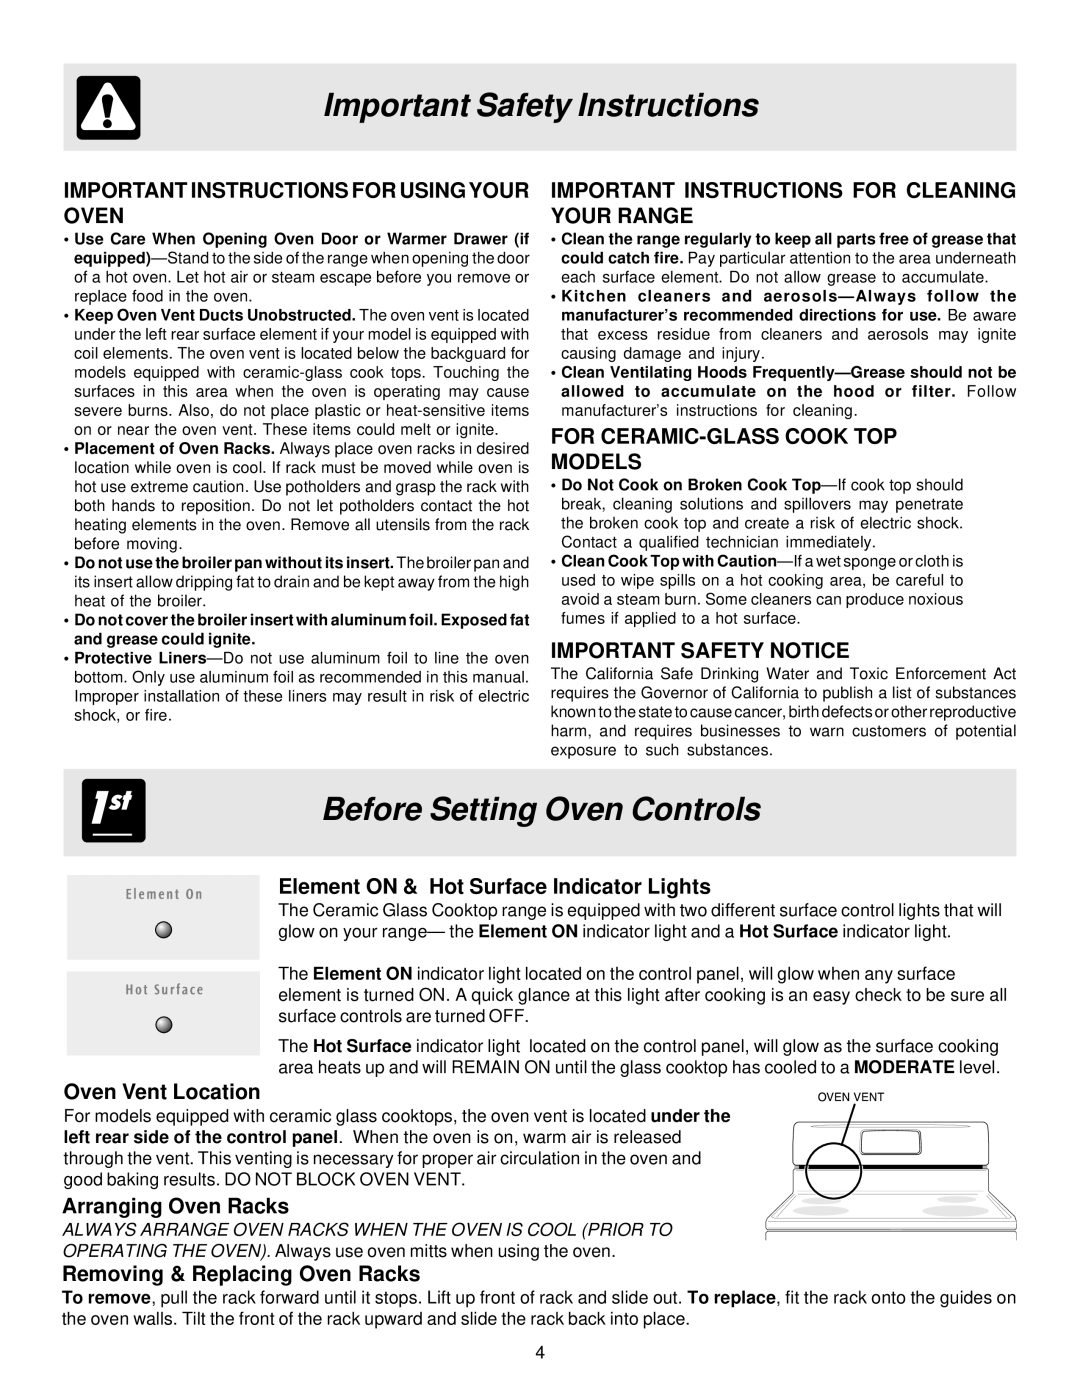 Frigidaire ES100 Before Setting Oven Controls, Important Instructions For Usingyour Oven, Important Safety Notice 